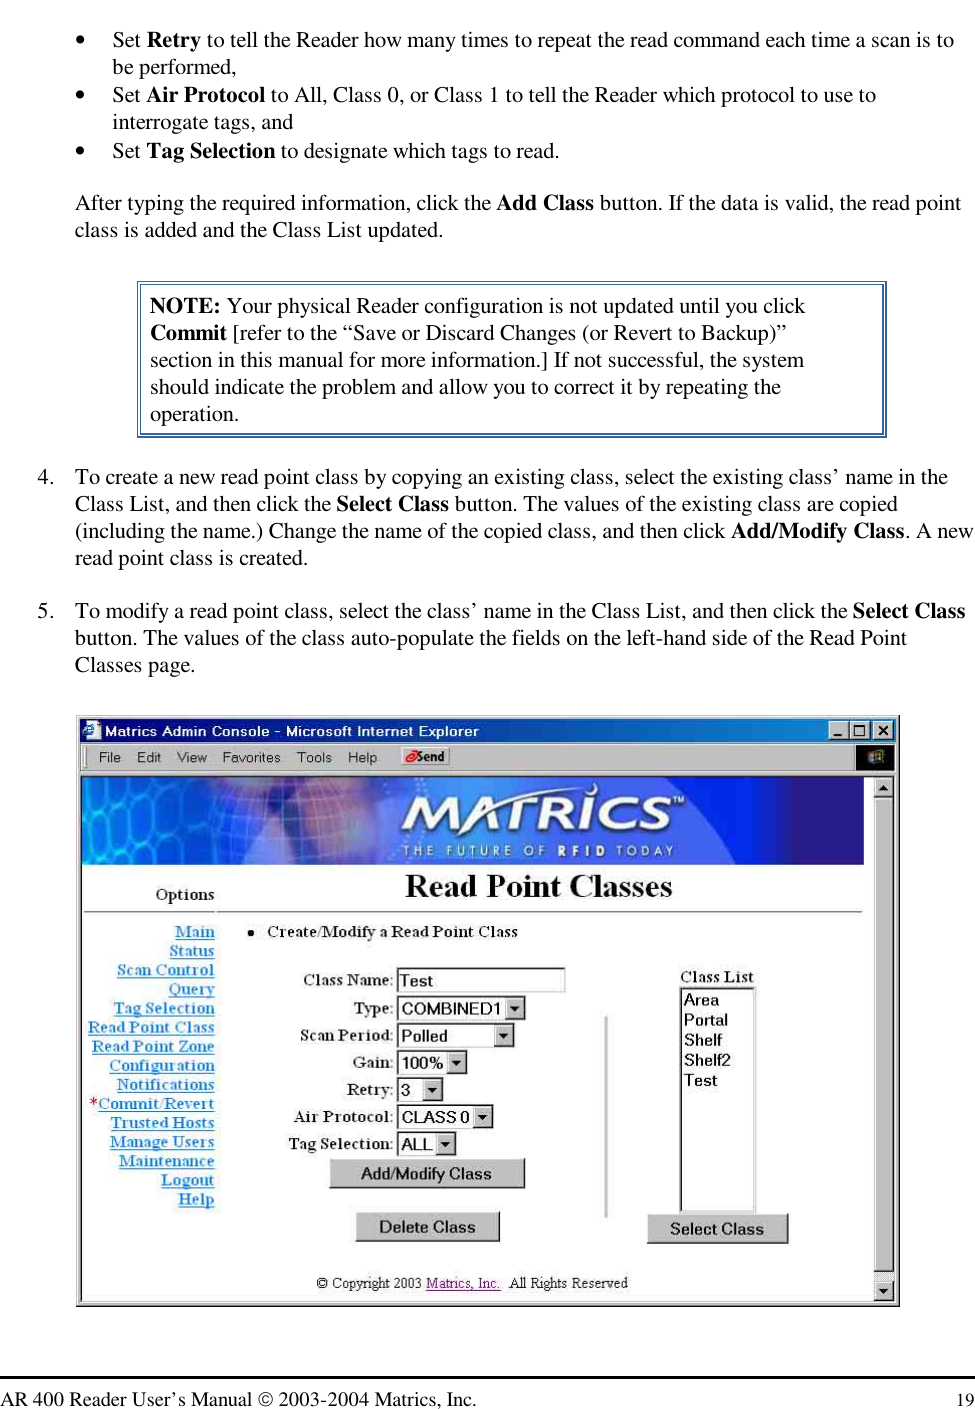   AR 400 Reader User’s Manual  2003-2004 Matrics, Inc.  19 •  Set Retry to tell the Reader how many times to repeat the read command each time a scan is to be performed,  •  Set Air Protocol to All, Class 0, or Class 1 to tell the Reader which protocol to use to interrogate tags, and •  Set Tag Selection to designate which tags to read. After typing the required information, click the Add Class button. If the data is valid, the read point class is added and the Class List updated. NOTE: Your physical Reader configuration is not updated until you click Commit [refer to the “Save or Discard Changes (or Revert to Backup)” section in this manual for more information.] If not successful, the system should indicate the problem and allow you to correct it by repeating the operation. 4.  To create a new read point class by copying an existing class, select the existing class’ name in the Class List, and then click the Select Class button. The values of the existing class are copied (including the name.) Change the name of the copied class, and then click Add/Modify Class. A new read point class is created. 5.  To modify a read point class, select the class’ name in the Class List, and then click the Select Class button. The values of the class auto-populate the fields on the left-hand side of the Read Point Classes page.  